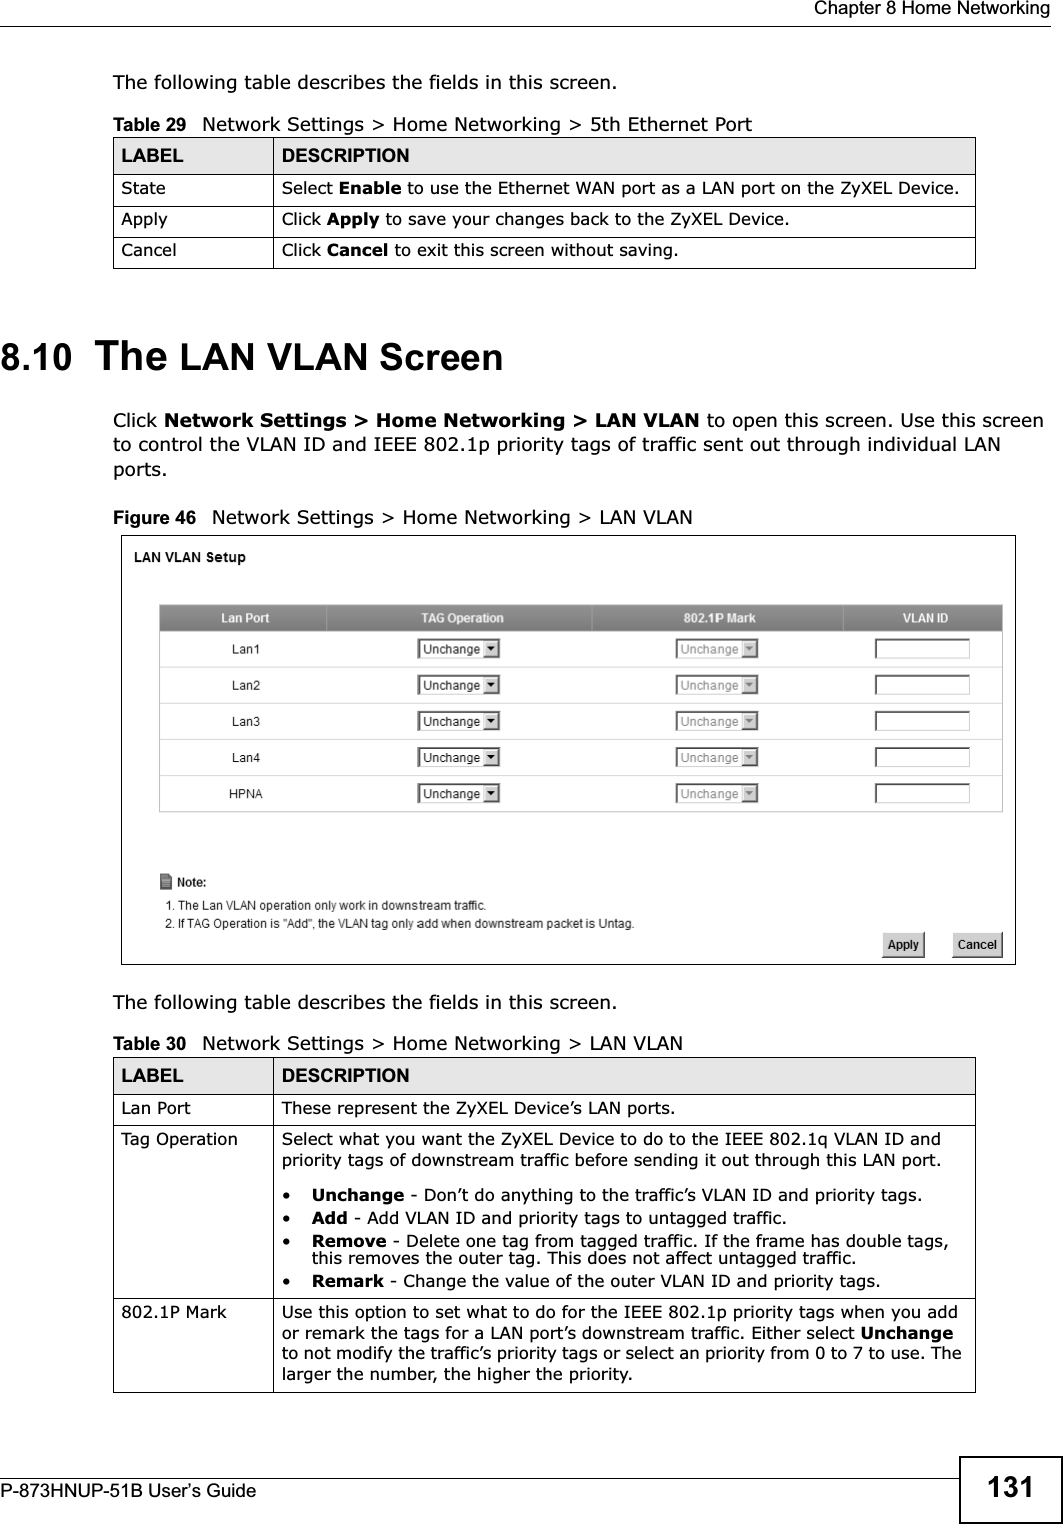  Chapter 8 Home NetworkingP-873HNUP-51B User’s Guide 131The following table describes the fields in this screen.  8.10 The LAN VLAN ScreenClick Network Settings &gt; Home Networking &gt; LAN VLAN to open this screen. Use this screen to control the VLAN ID and IEEE 802.1p priority tags of traffic sent out through individual LAN ports. Figure 46   Network Settings &gt; Home Networking &gt; LAN VLANThe following table describes the fields in this screen.  Table 29   Network Settings &gt; Home Networking &gt; 5th Ethernet PortLABEL DESCRIPTIONState Select Enable to use the Ethernet WAN port as a LAN port on the ZyXEL Device.Apply Click Apply to save your changes back to the ZyXEL Device.Cancel Click Cancel to exit this screen without saving.Table 30   Network Settings &gt; Home Networking &gt; LAN VLANLABEL DESCRIPTIONLan Port These represent the ZyXEL Device’s LAN ports.Tag Operation Select what you want the ZyXEL Device to do to the IEEE 802.1q VLAN ID and priority tags of downstream traffic before sending it out through this LAN port.•Unchange - Don’t do anything to the traffic’s VLAN ID and priority tags.•Add - Add VLAN ID and priority tags to untagged traffic.•Remove - Delete one tag from tagged traffic. If the frame has double tags, this removes the outer tag. This does not affect untagged traffic.•Remark - Change the value of the outer VLAN ID and priority tags.802.1P Mark Use this option to set what to do for the IEEE 802.1p priority tags when you add or remark the tags for a LAN port’s downstream traffic. Either select Unchangeto not modify the traffic’s priority tags or select an priority from 0 to 7 to use. The larger the number, the higher the priority.